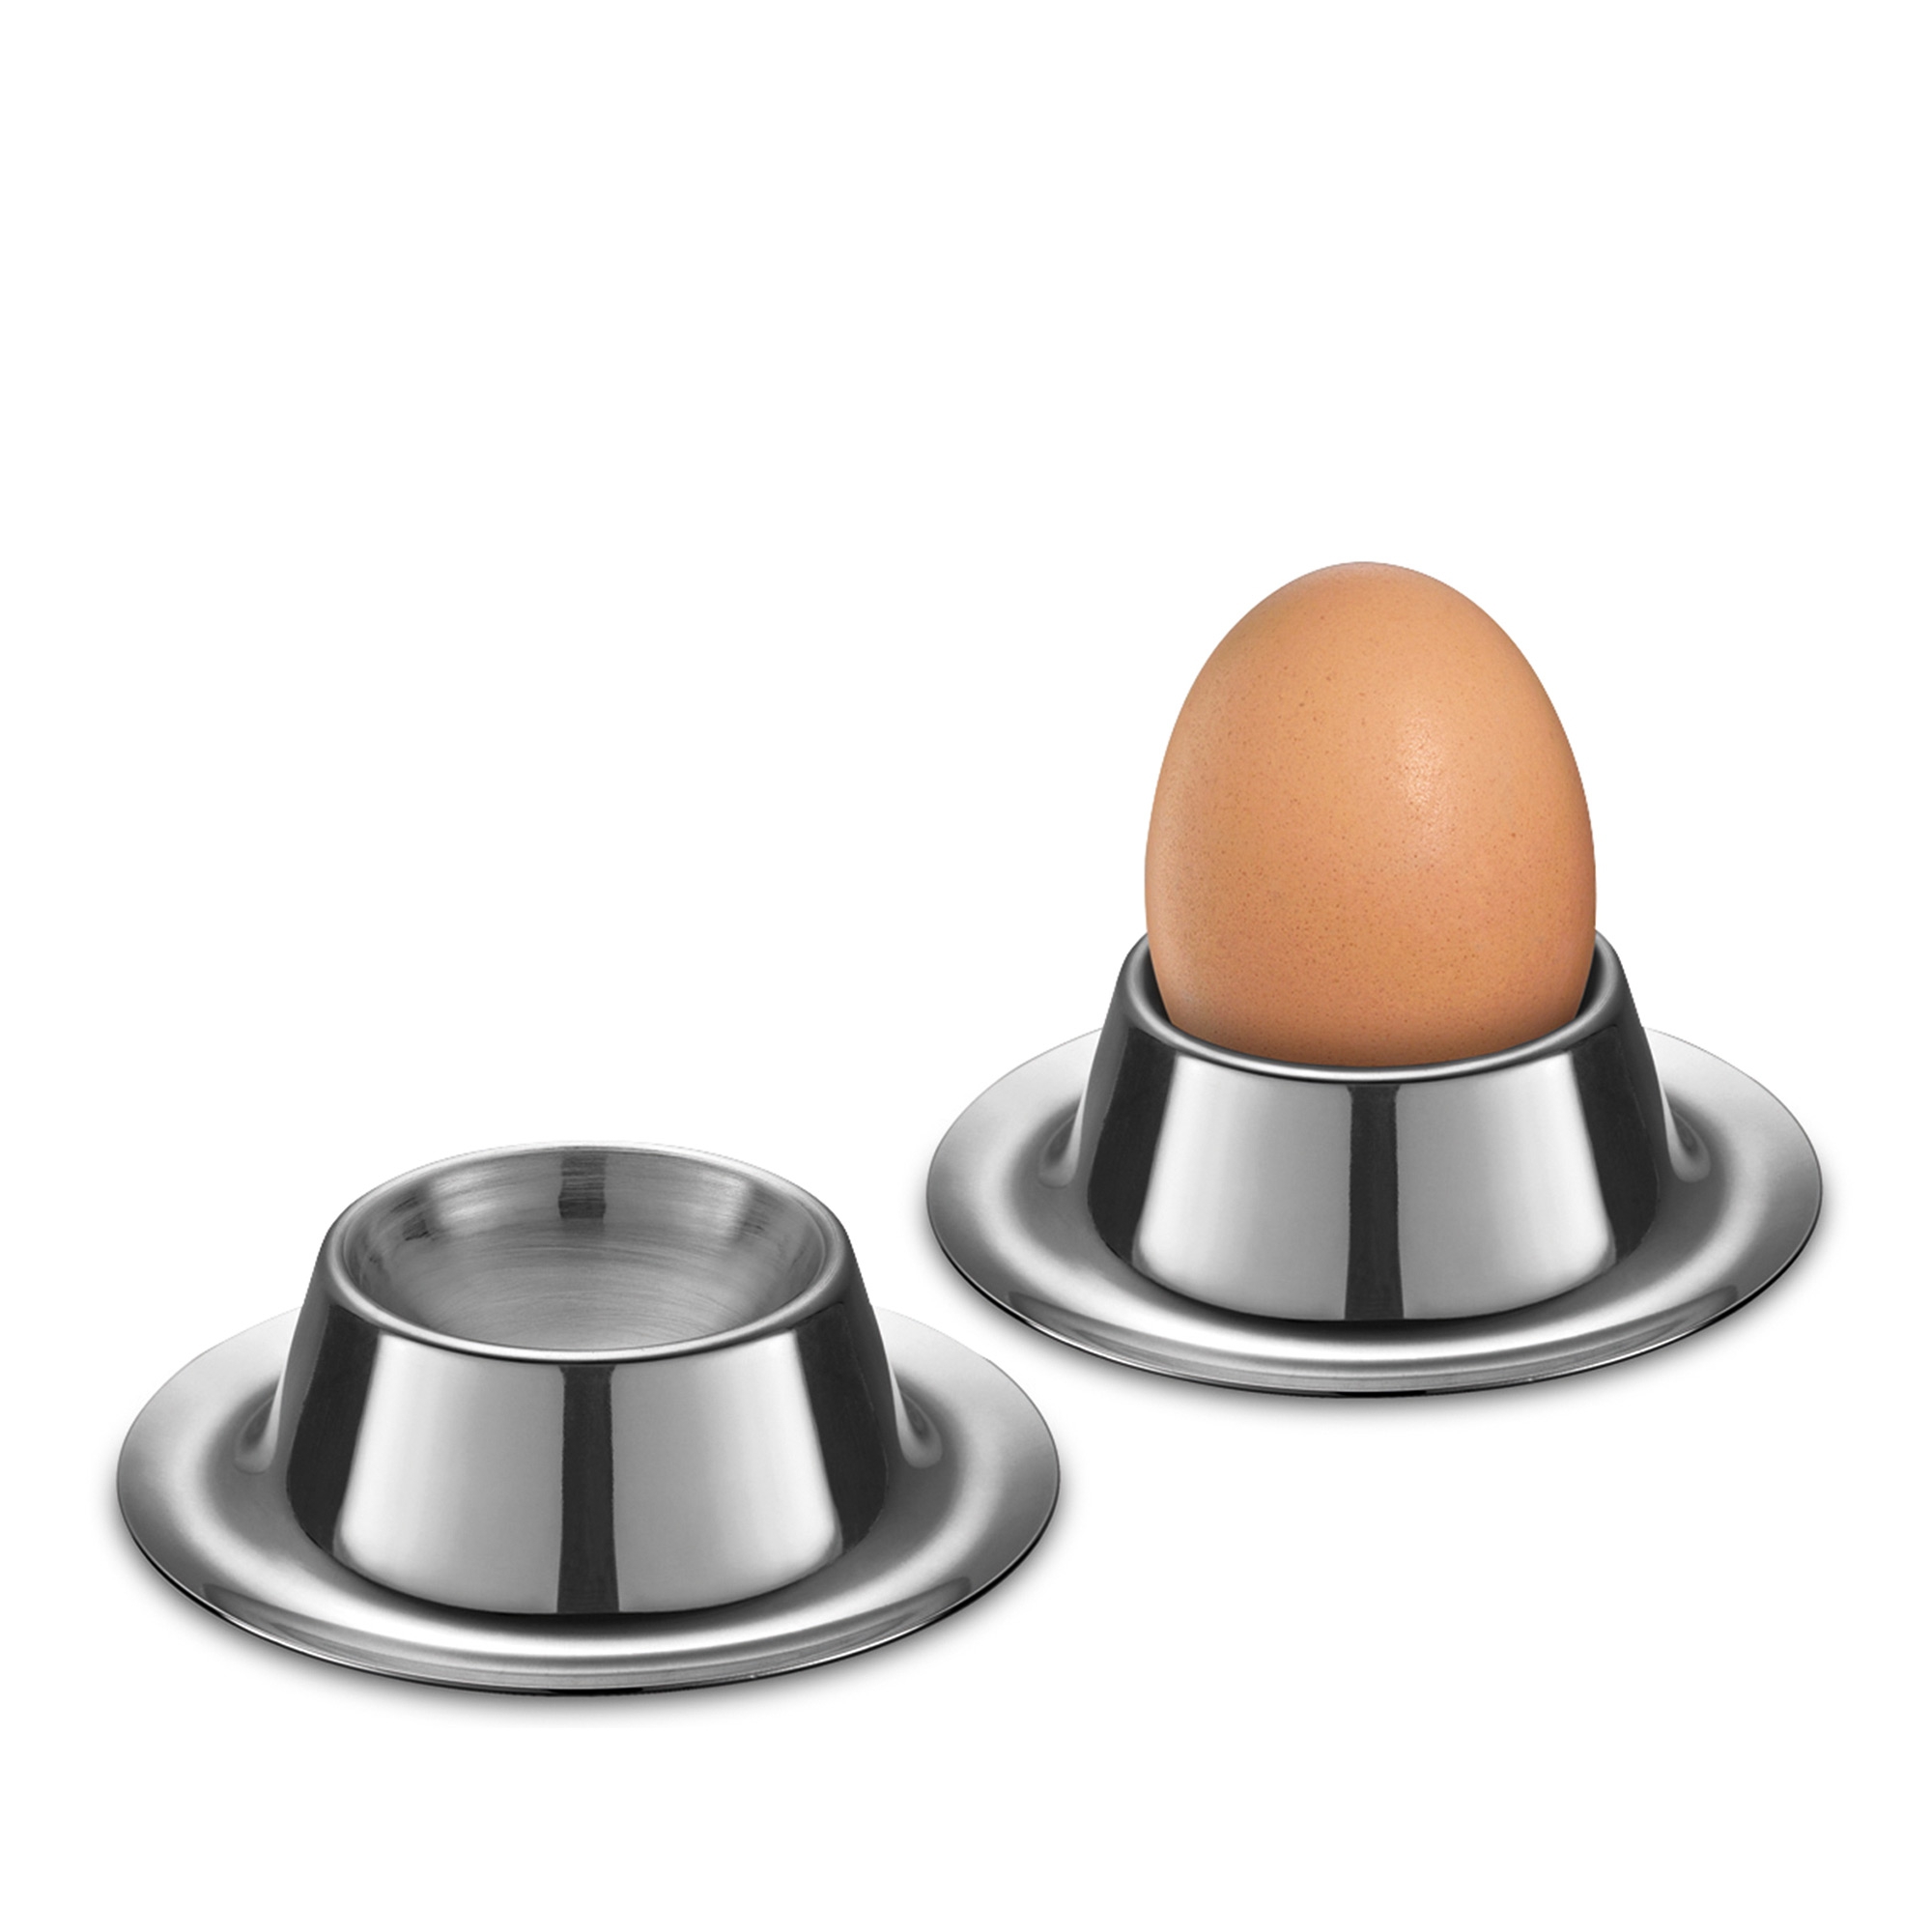 Cilio - egg cup set of 2 - UOVO